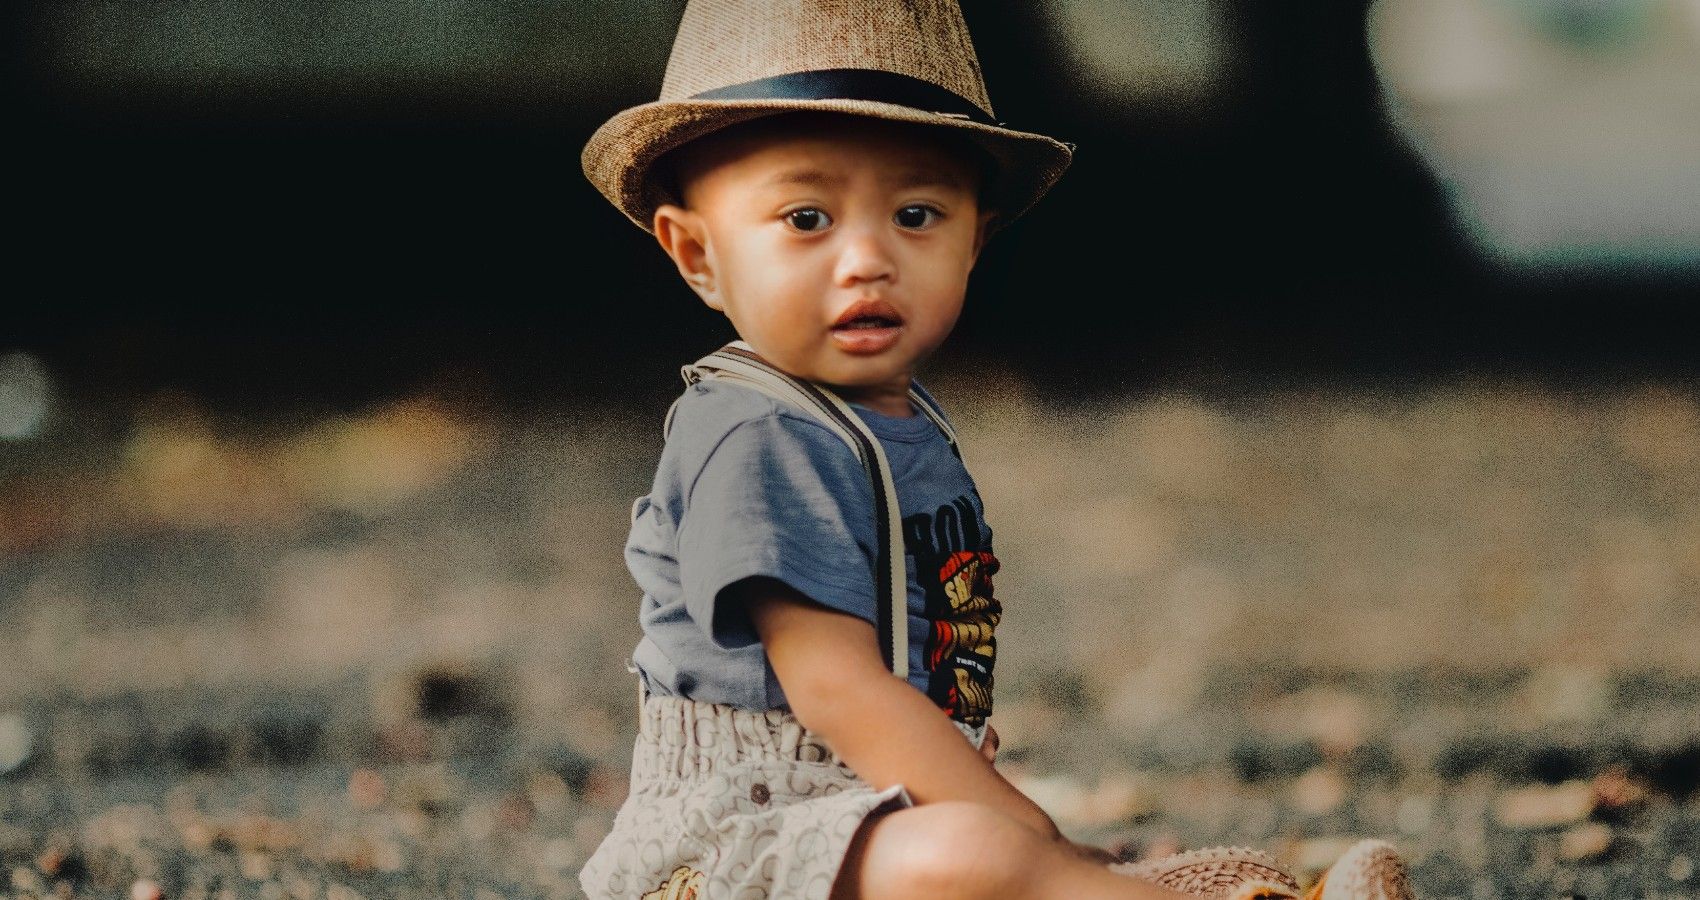 A toddler sitting outside with a hat on